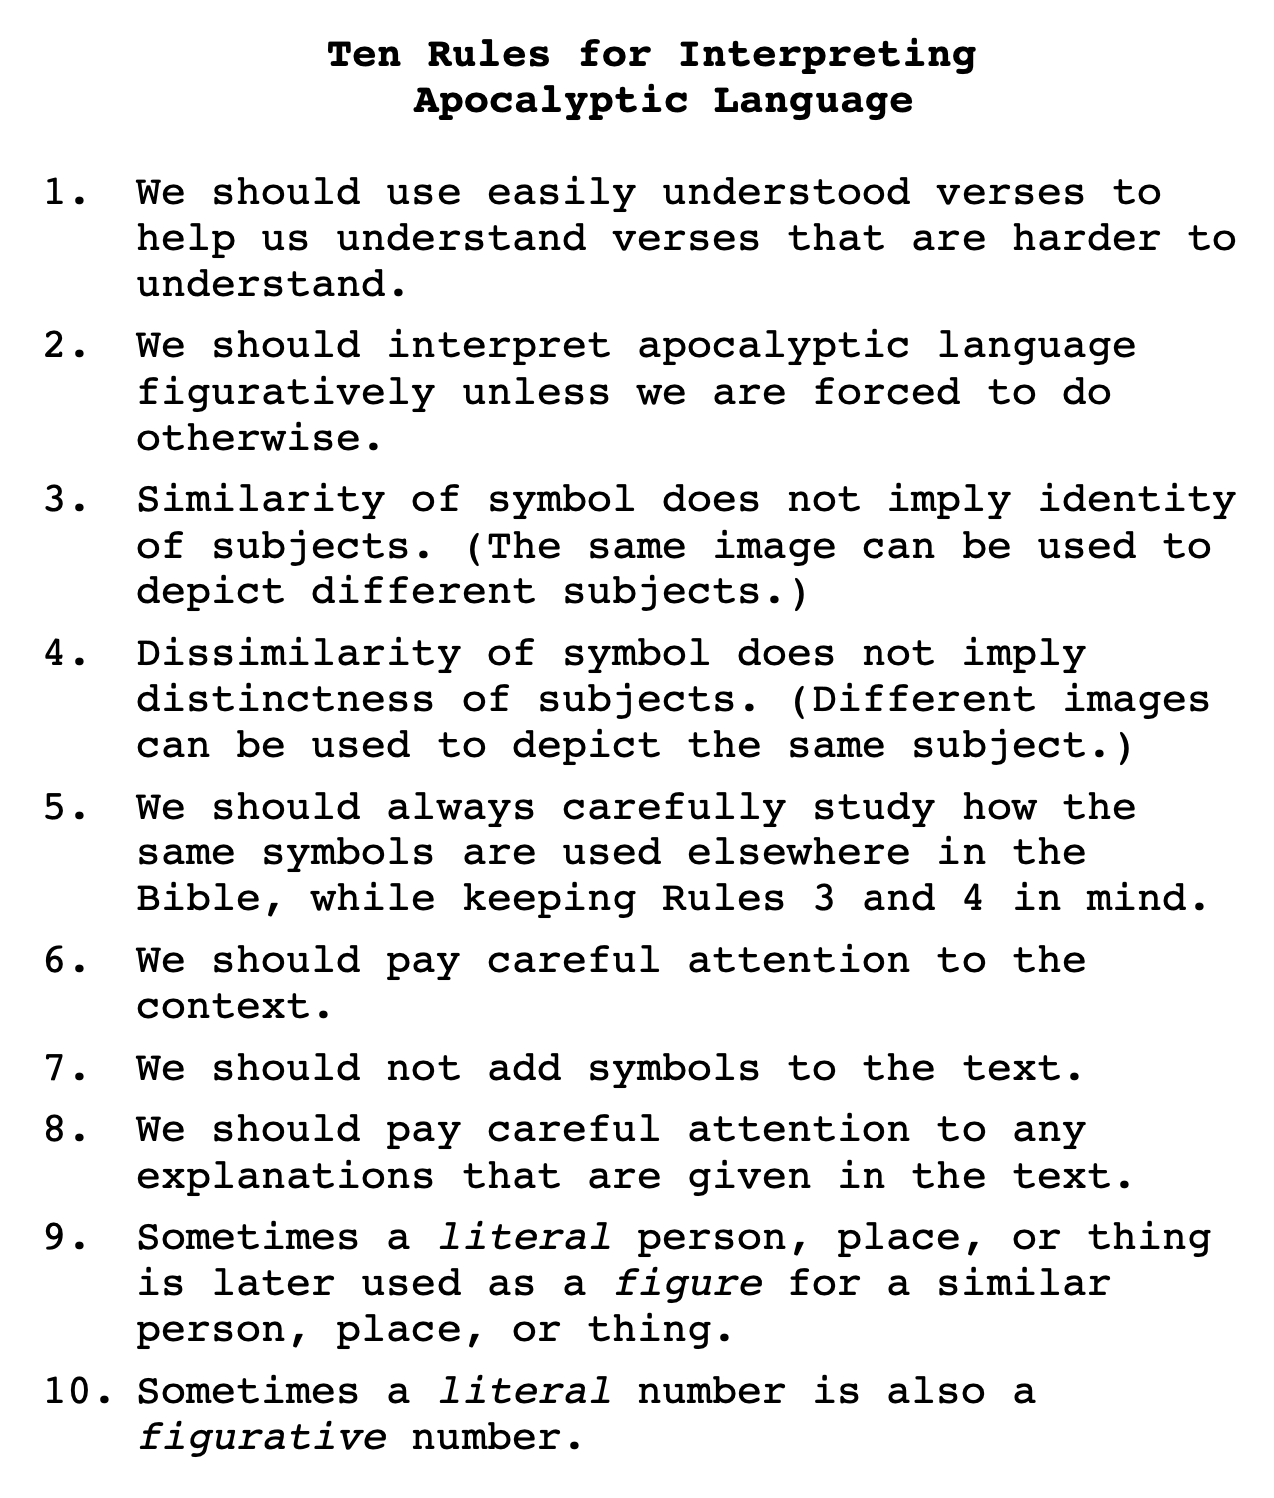 Ten Rules for Interpreting Apocalyptic Language